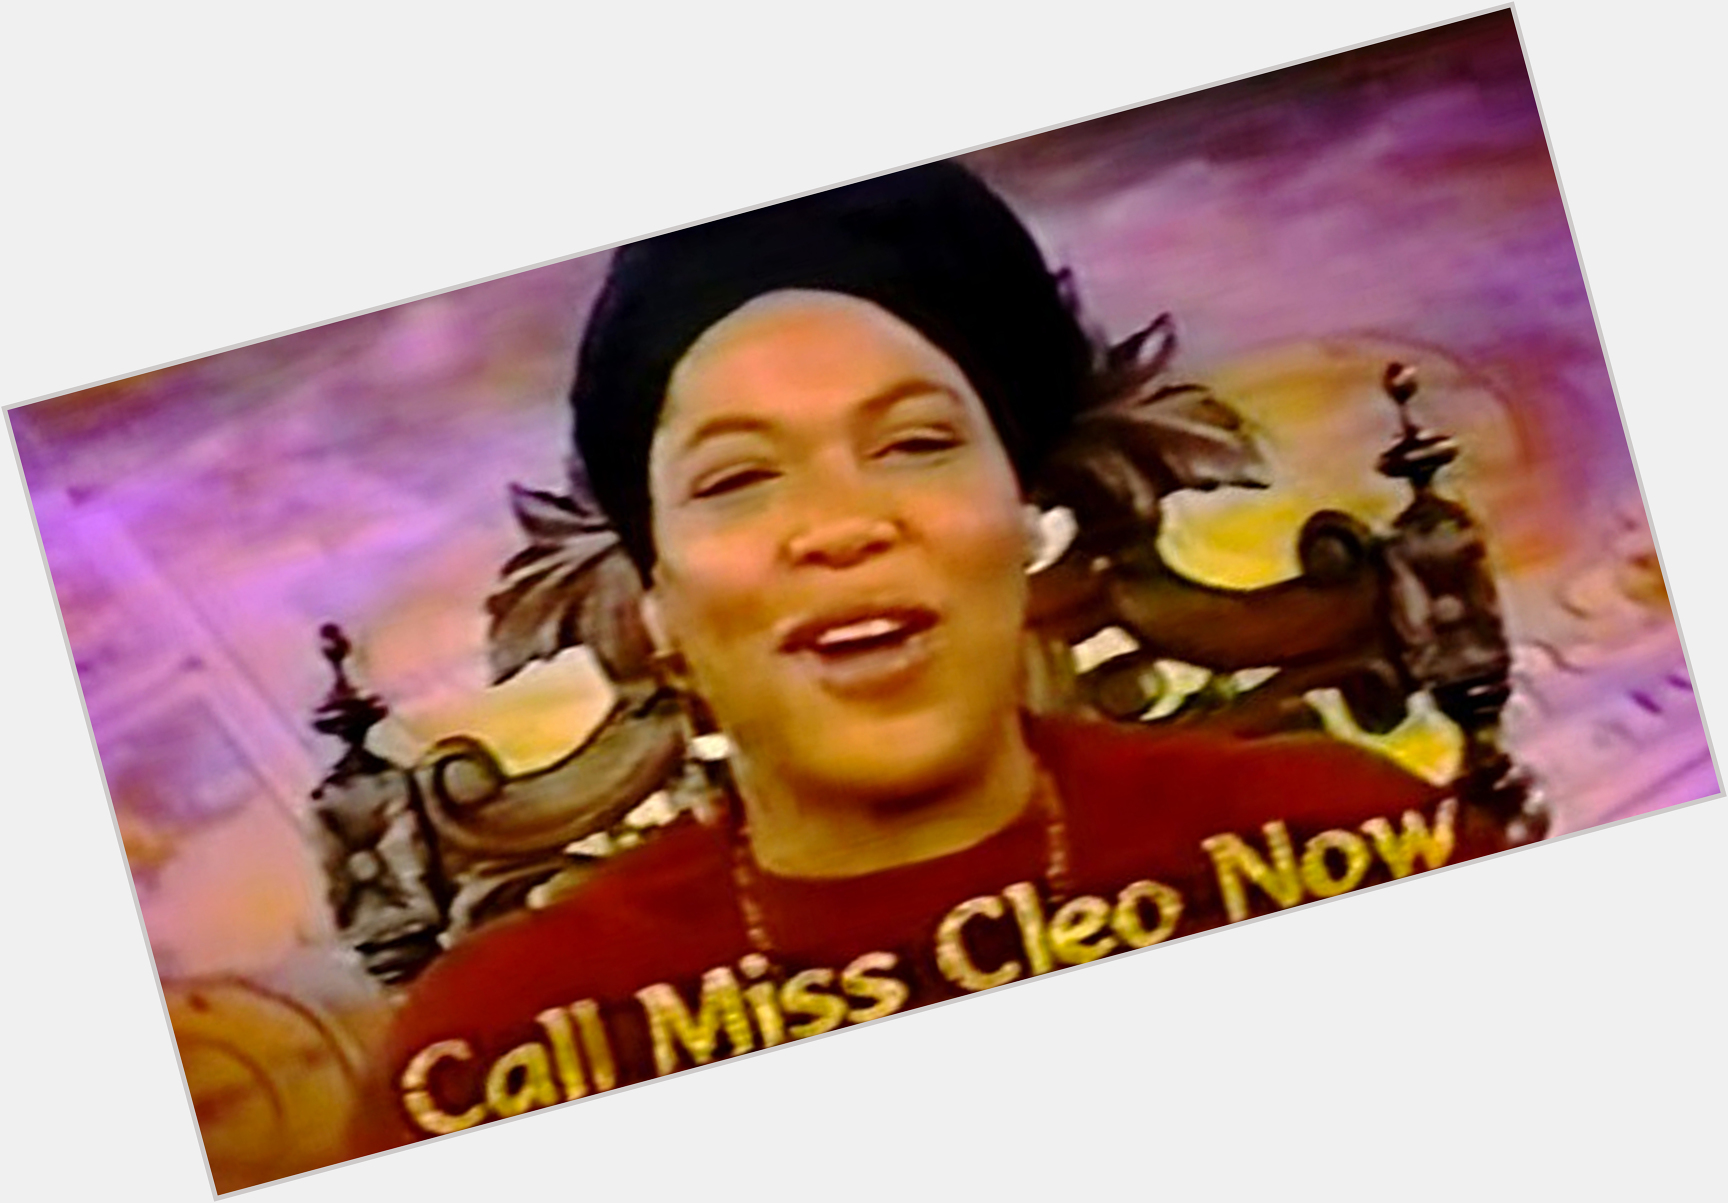 Miss Cleo dating 8